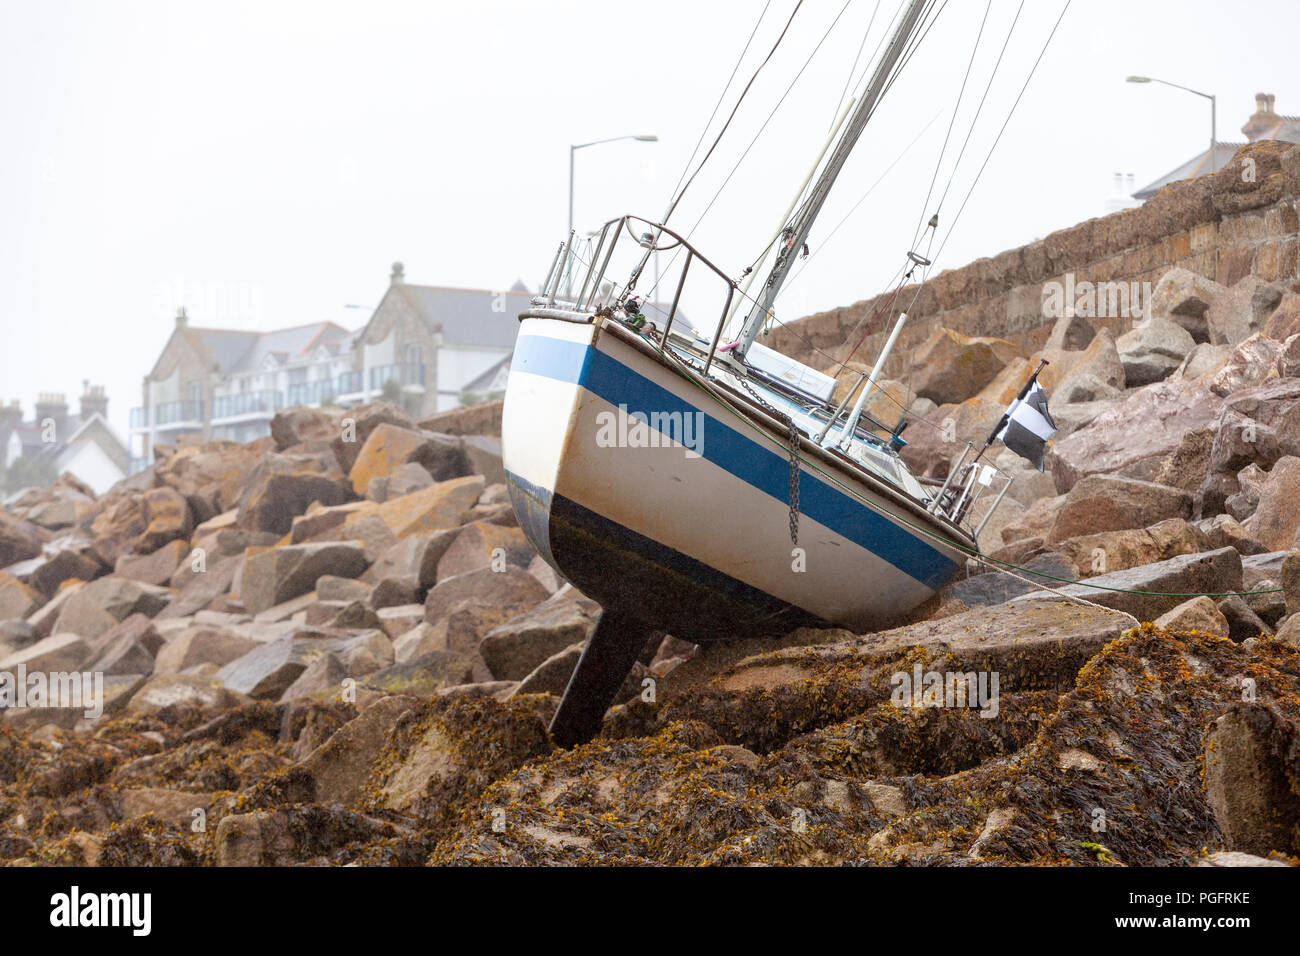 Penzance, Cornwall, UK. 26th August 2018. Man rescued by coastguard and RNLI as yacht is swept on to rocks in a storm.  Mike Newman/AlamyLiveNews Stock Photo